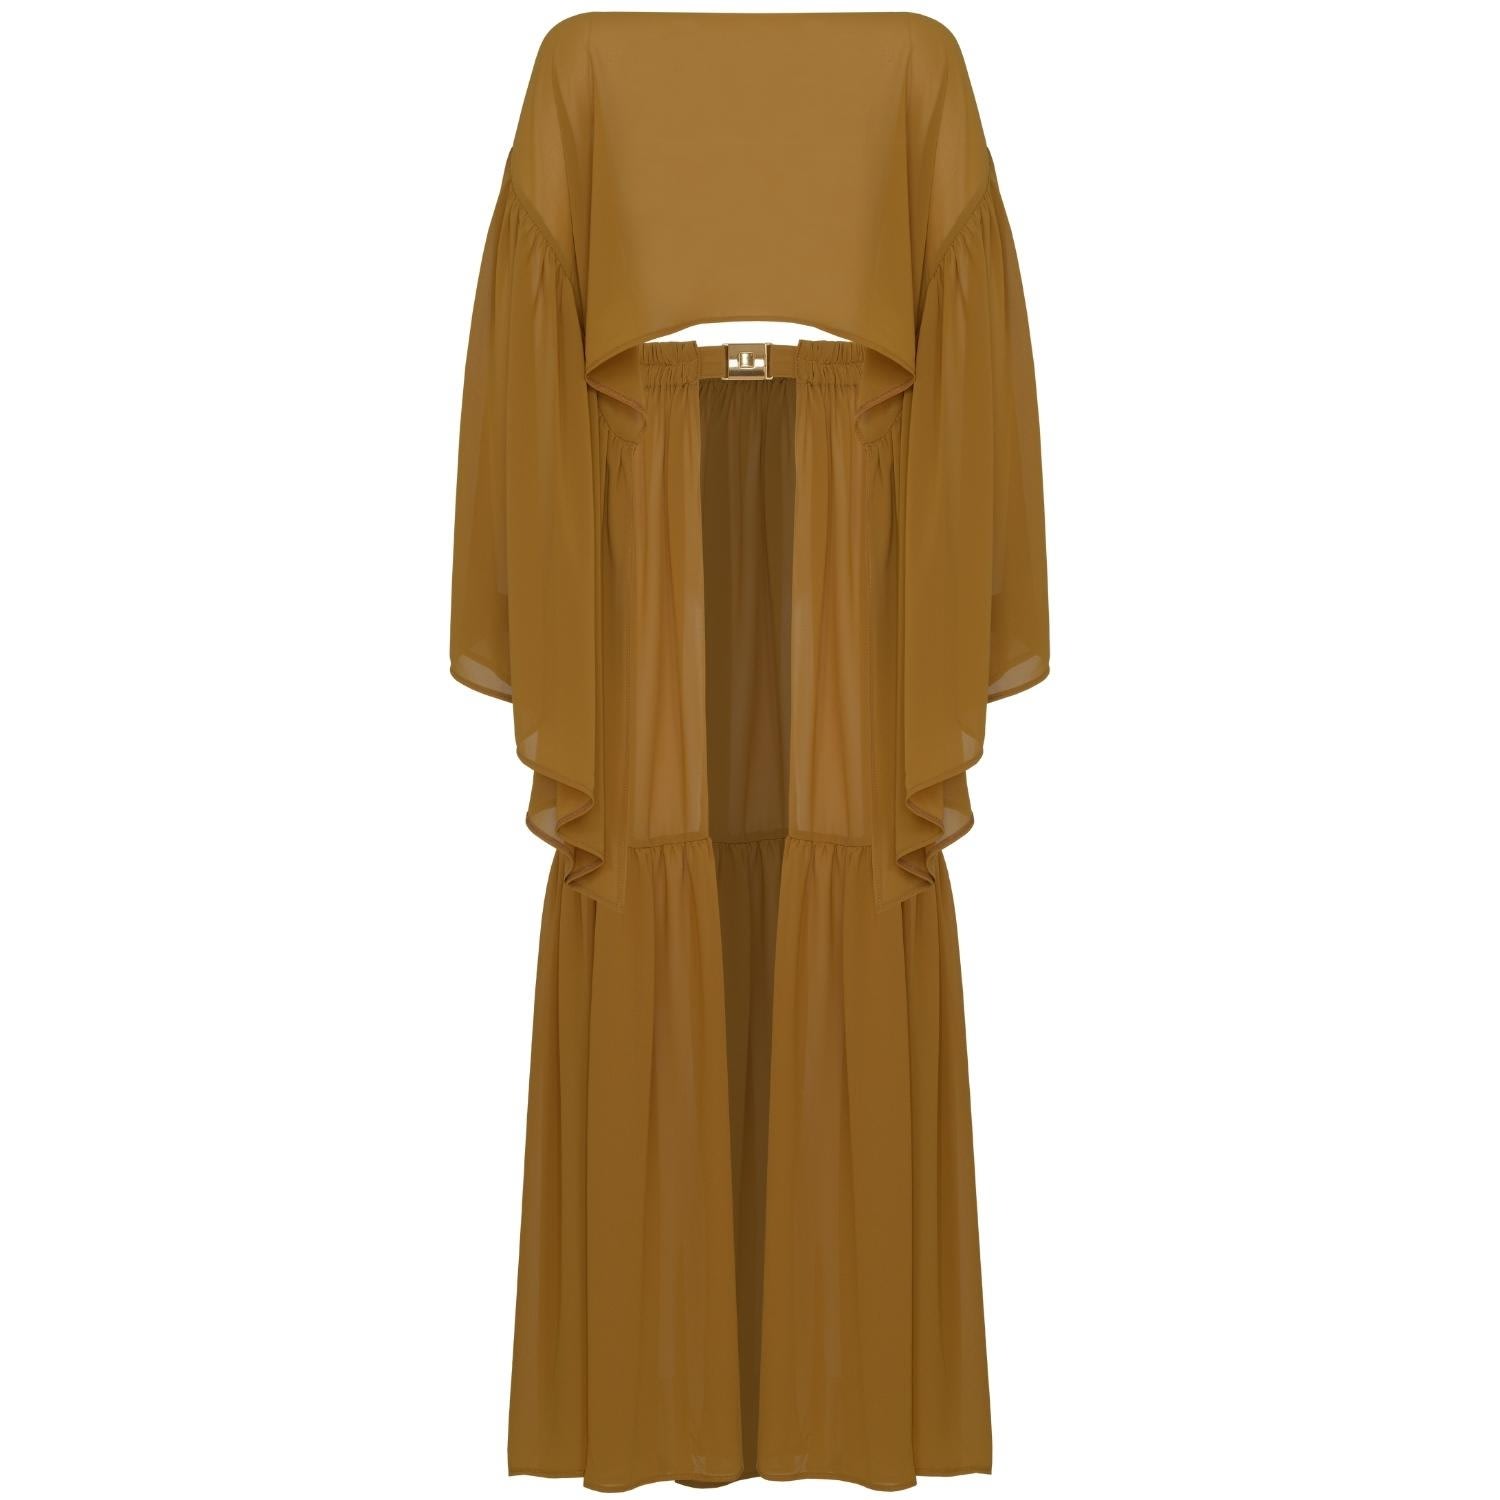 Women's Comely Two-Piece Beach Cover Up With Golden Buckle In Gold Xs/S ANTONINIAS